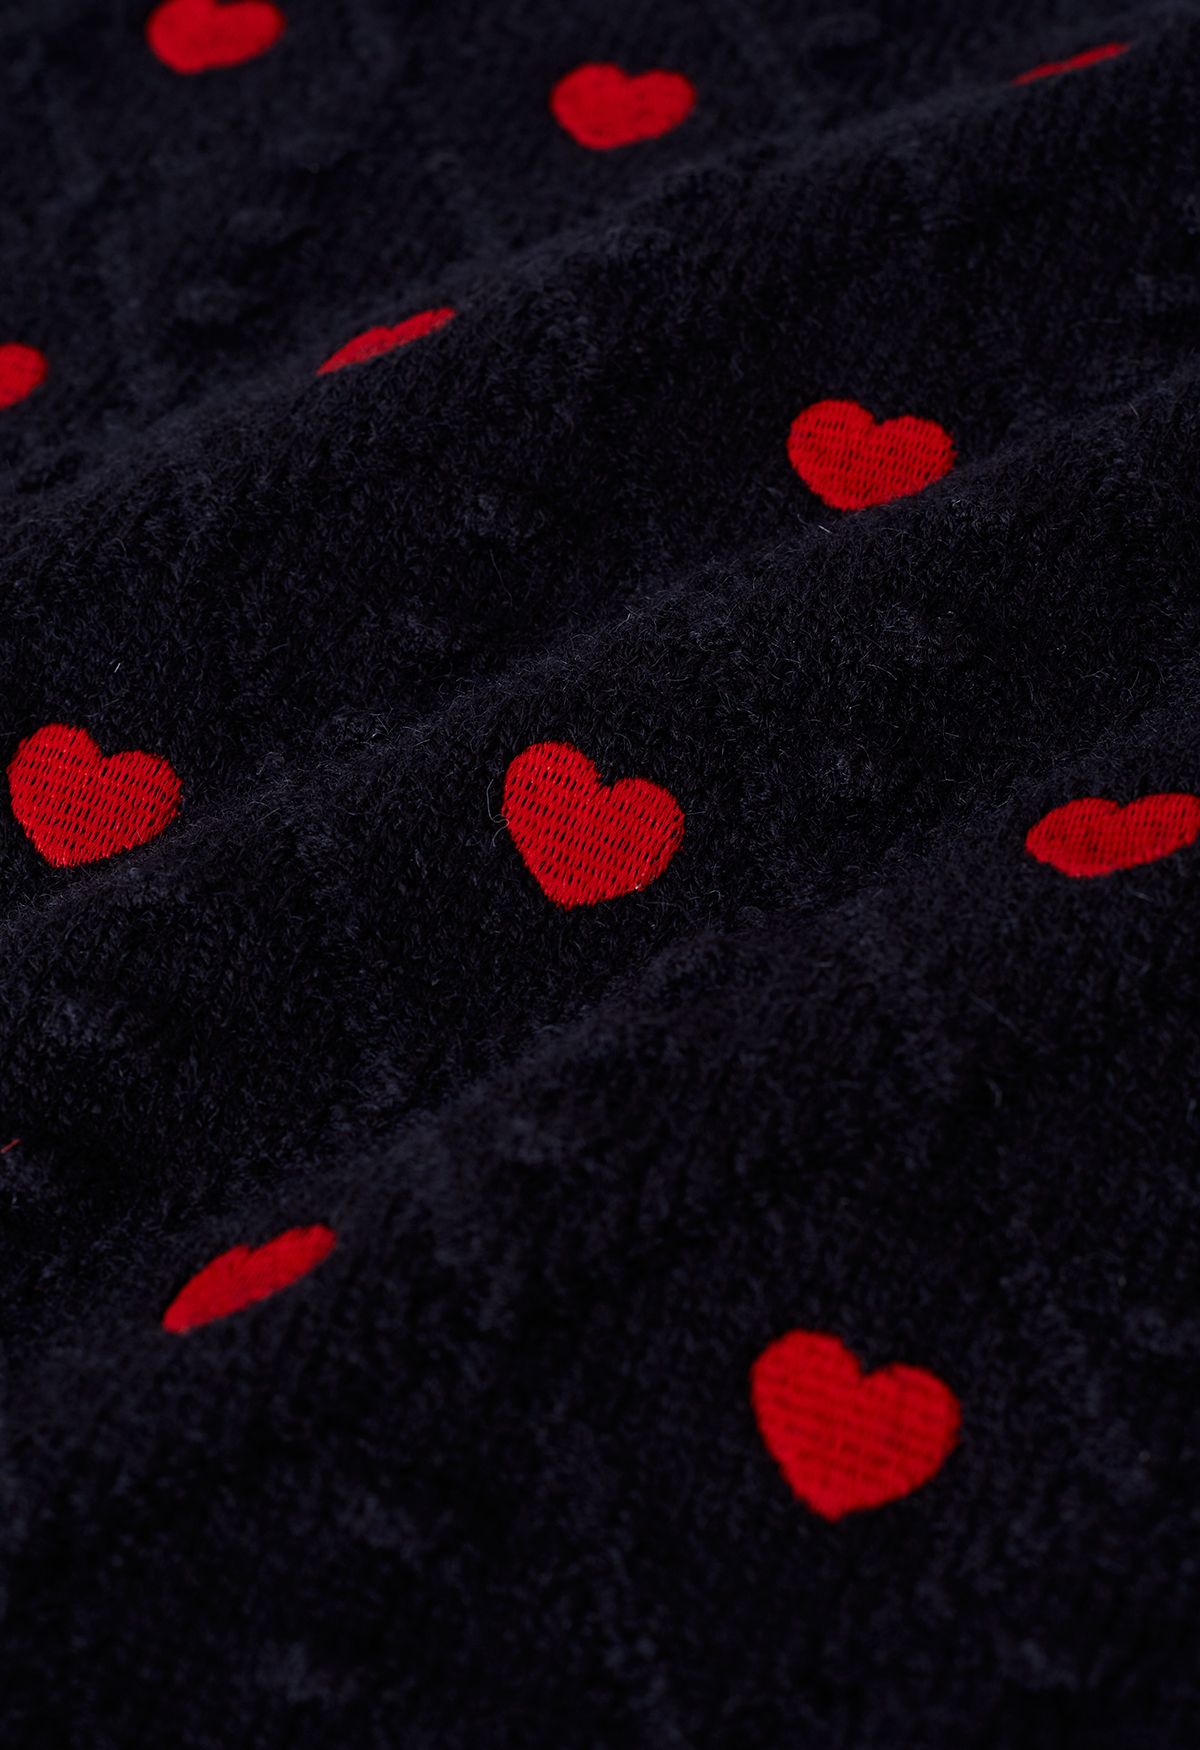 Full of Hearts Embroidered Emboss Knit Crop Sweater in Black